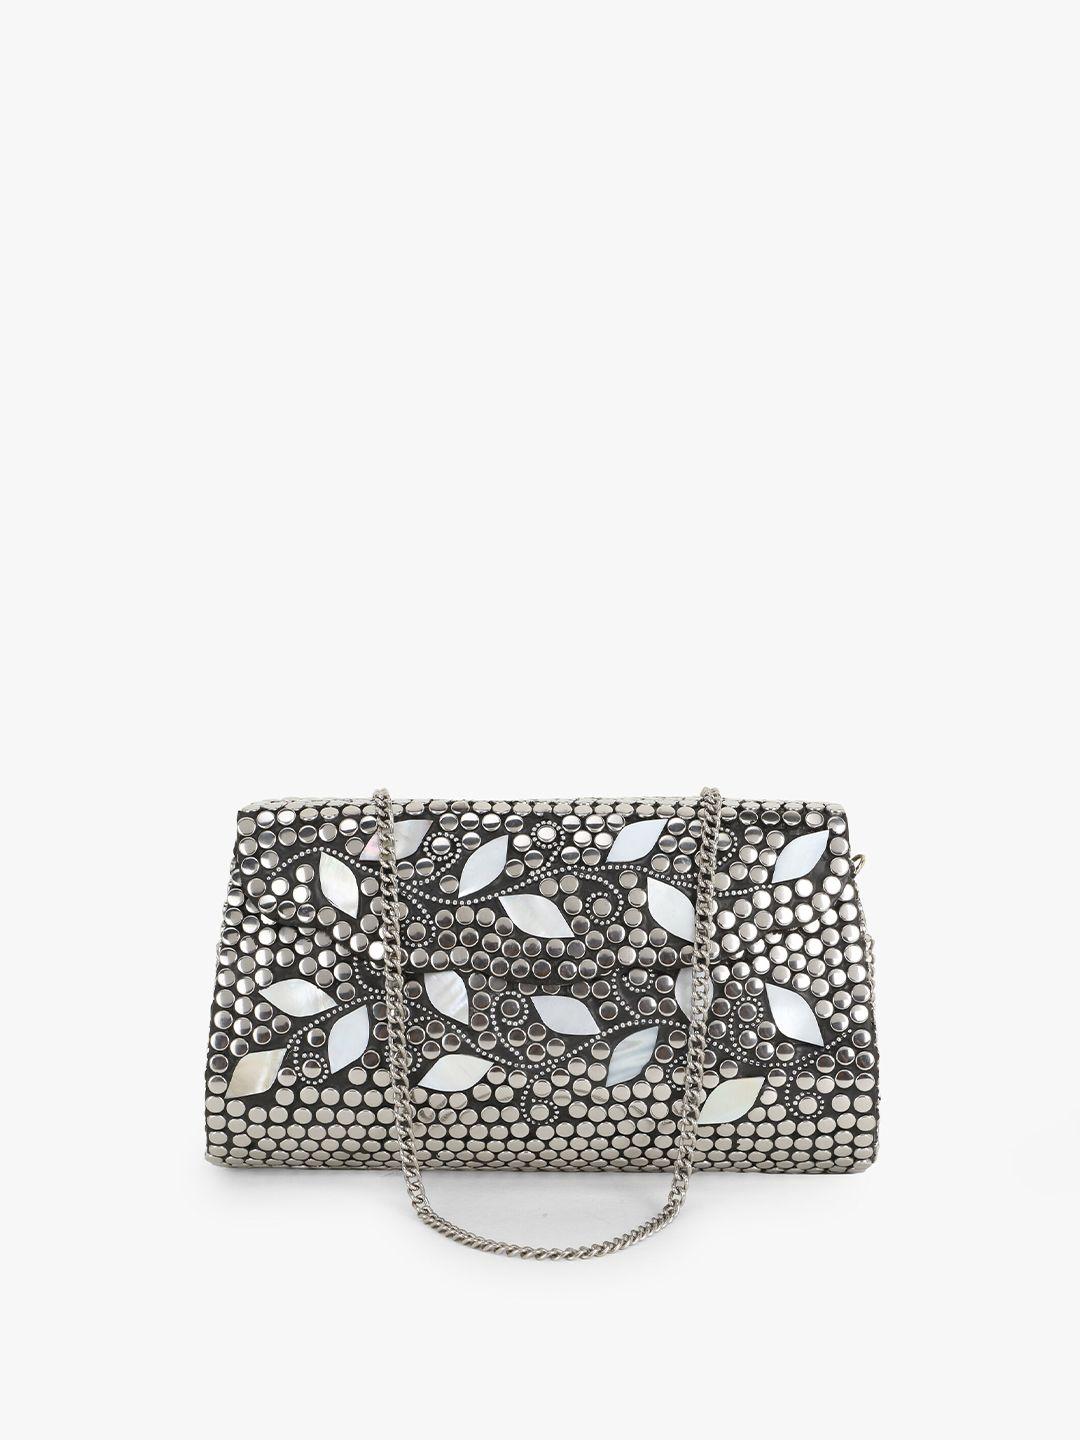 anekaant silver-toned embellished purse clutch